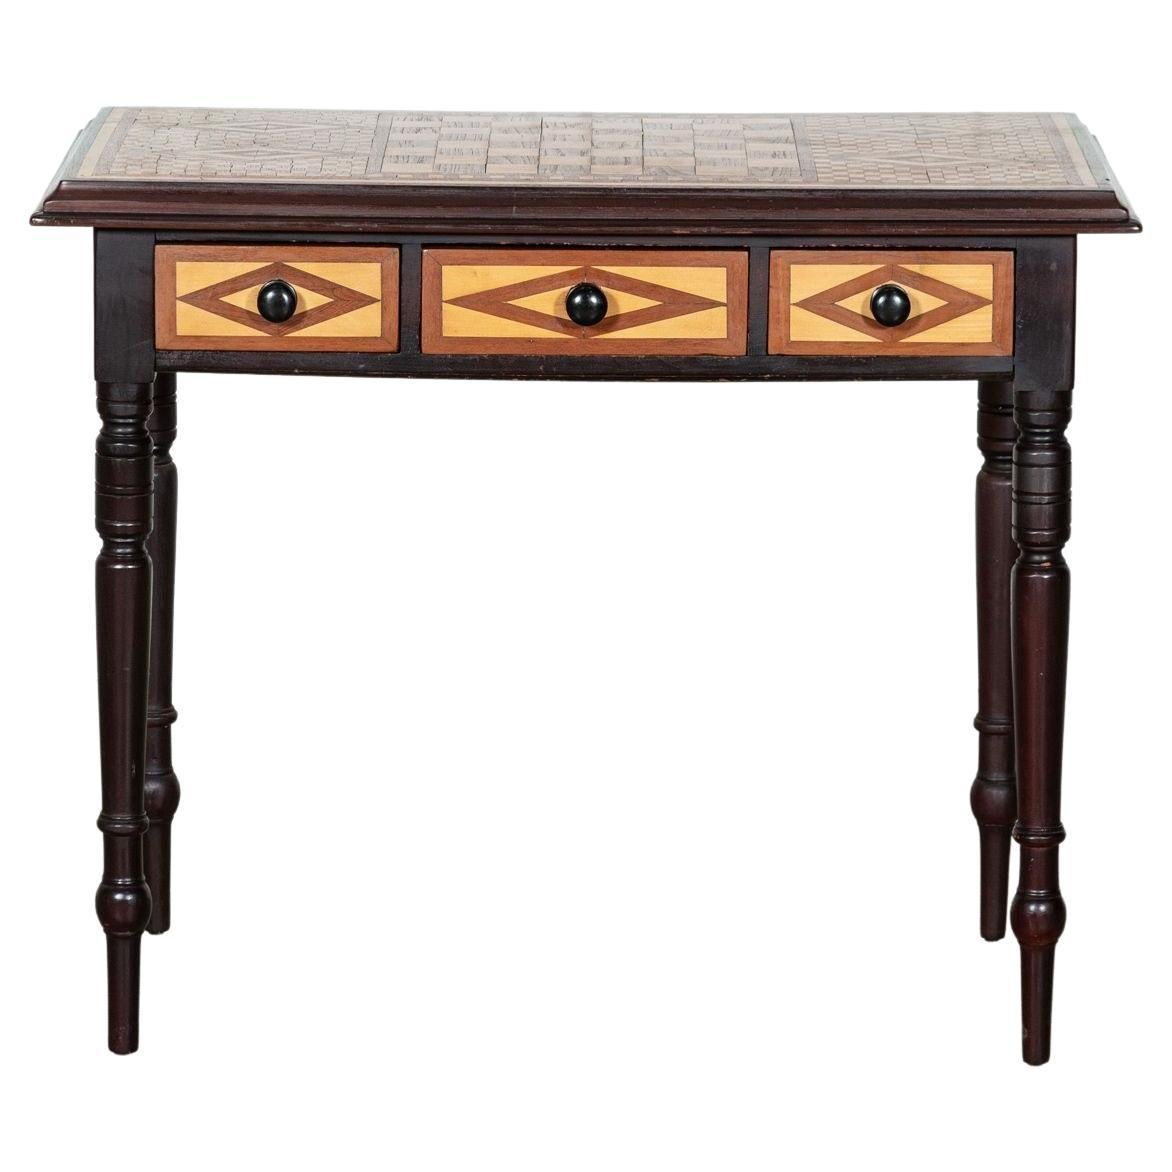 19th Century English Fruitwood Parquetry Games Table